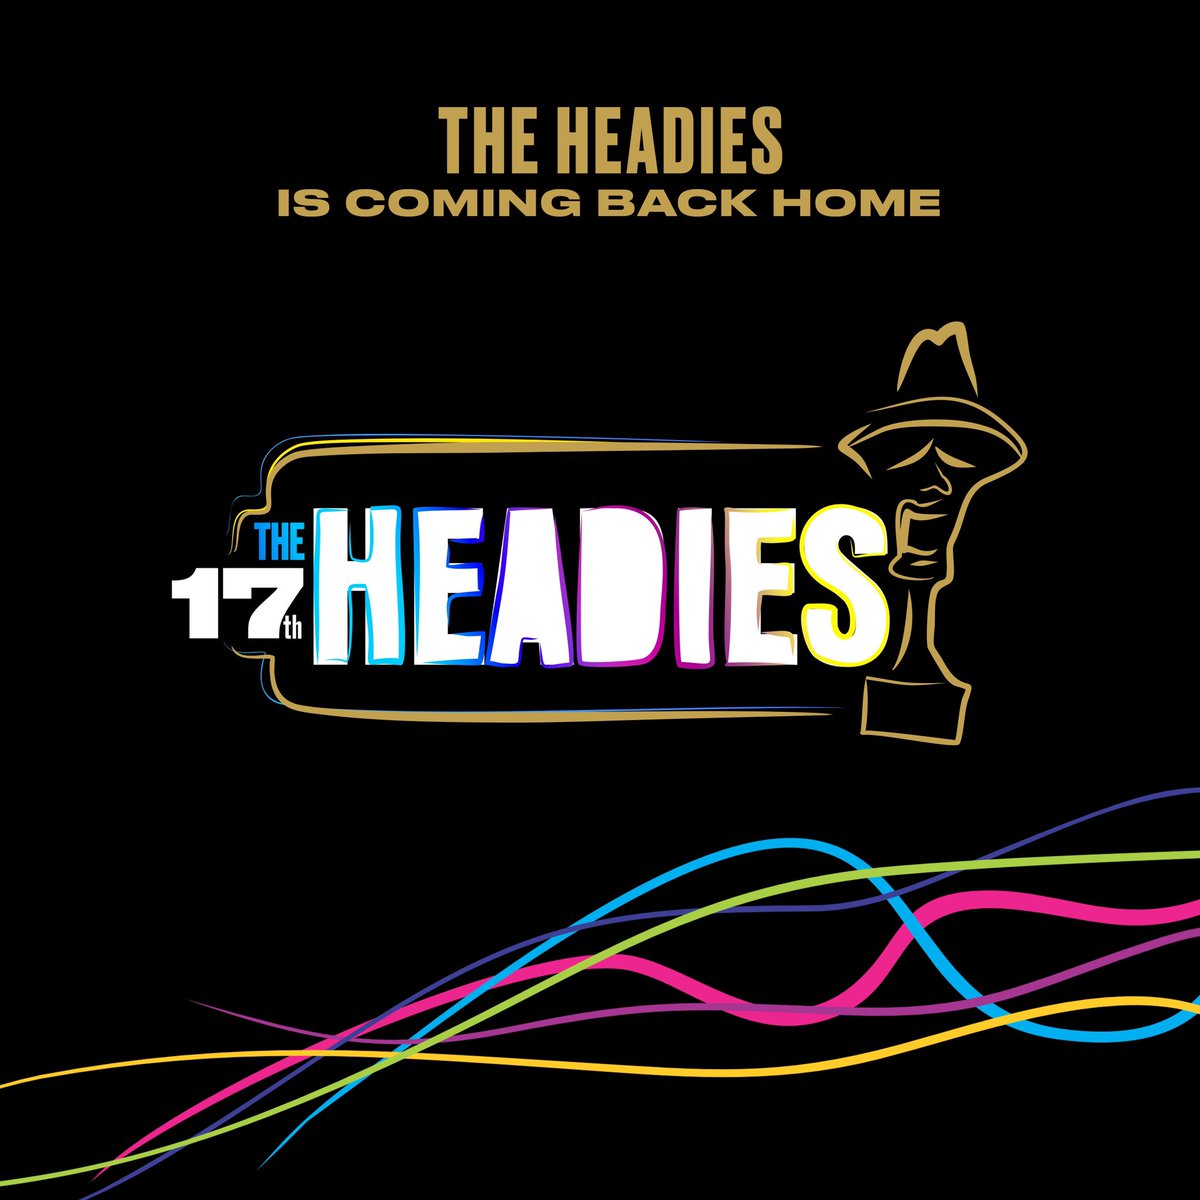 This year: 2024, we are bringing the world back home: To the place that birthed the sound that has led everbody to the dancefloor, that has launched viral videos, that has put our continent right at the centre of global pop culture. The Headies is coming back home